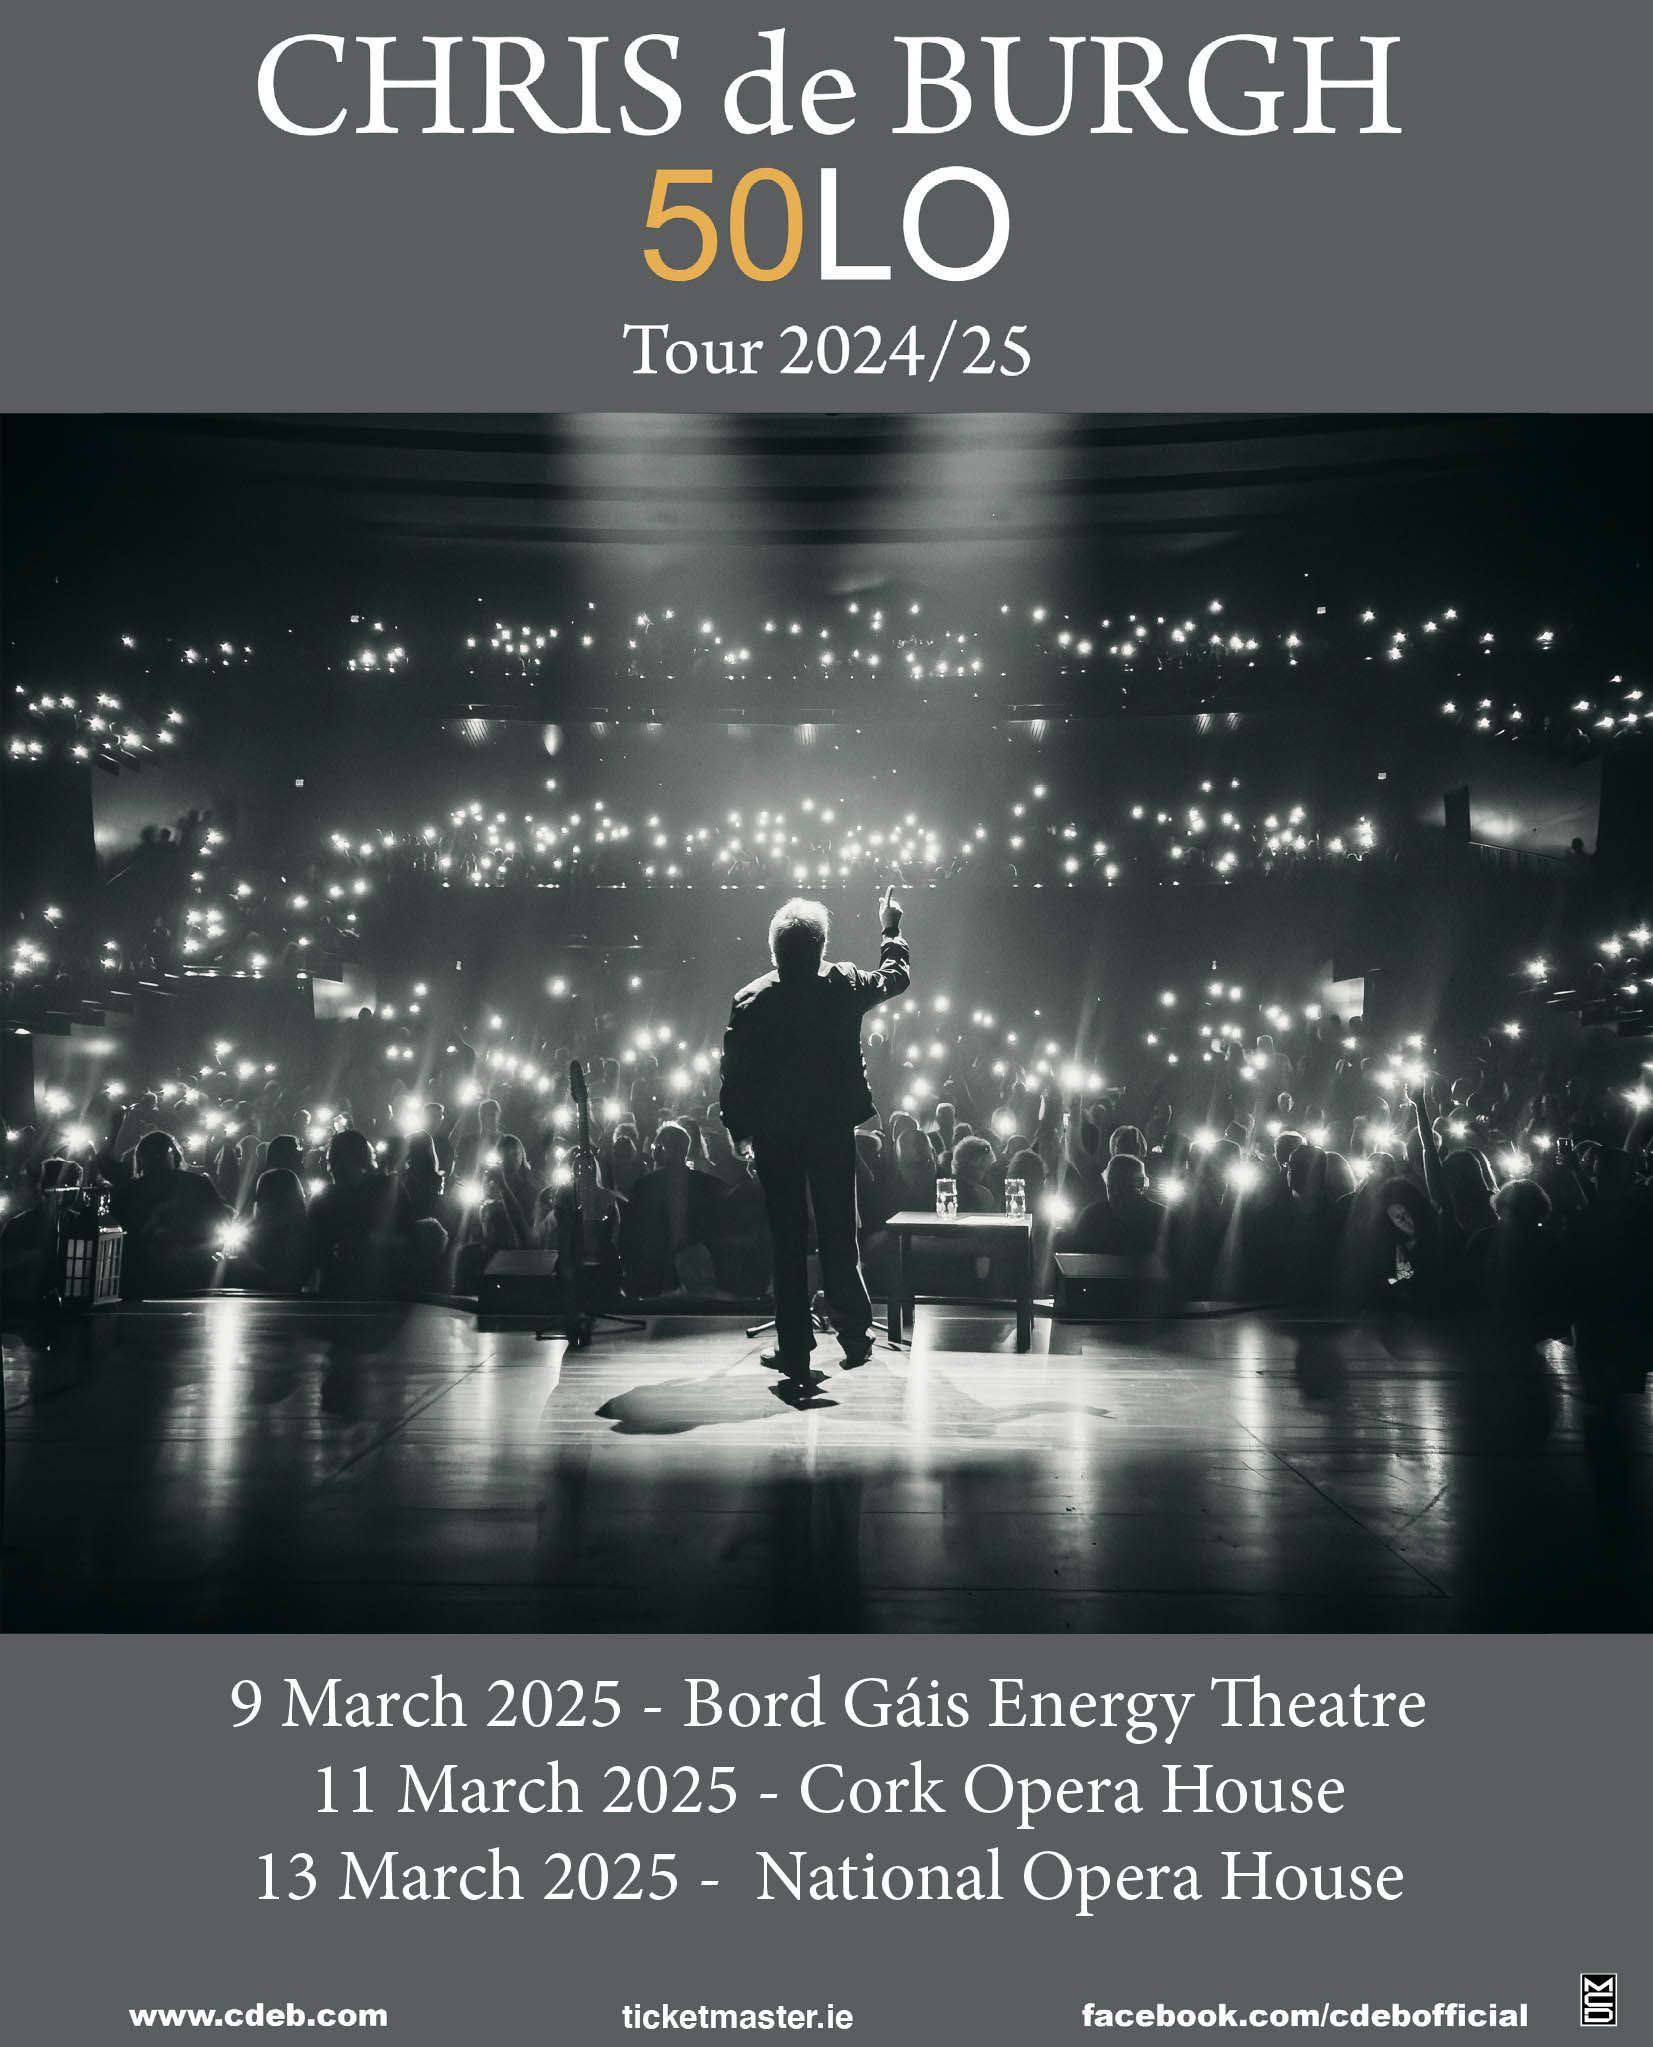 Chris de Burgh
Bord Gais Energy Theatre, Dublin - 09 March 2025
Cork Opera House - 11 March 2025
National Opera House Wexford - 13 March 2025
Tickets on sale this Thursday at 10am
from www.ticketmaster.ie
